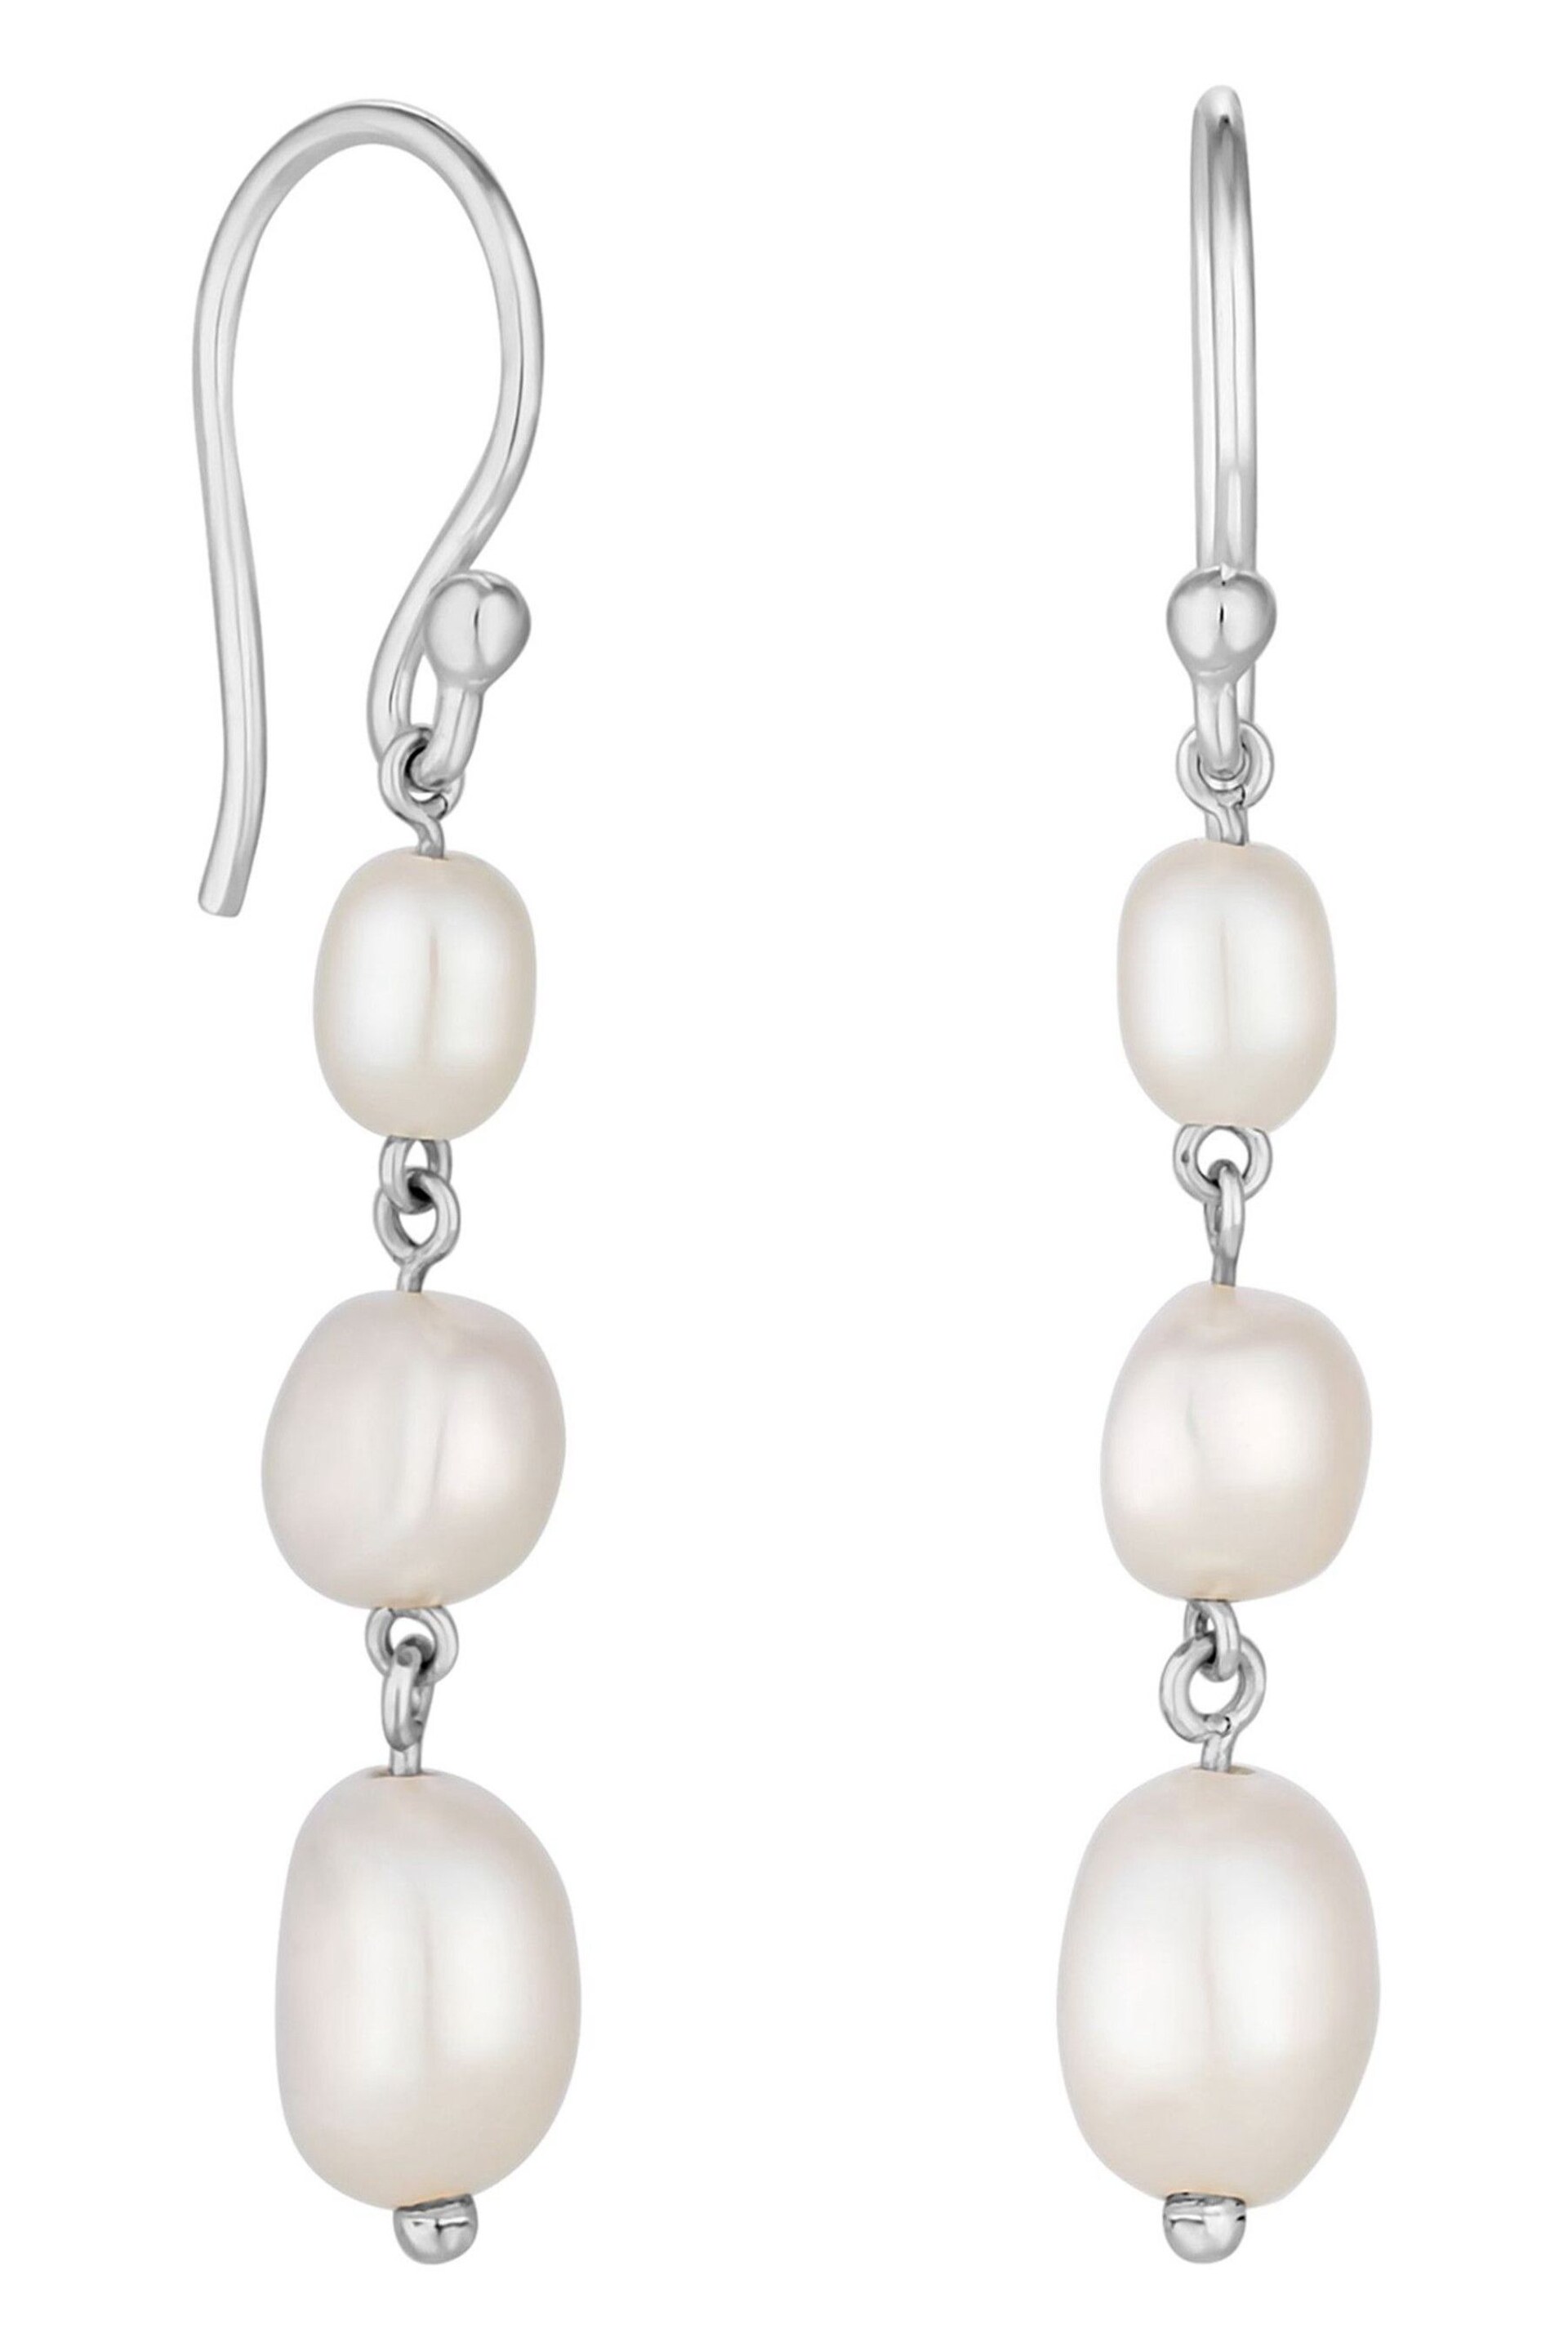 Simply Silver Silver Tone Freshwater Pearl Drop Earrings - Image 1 of 3